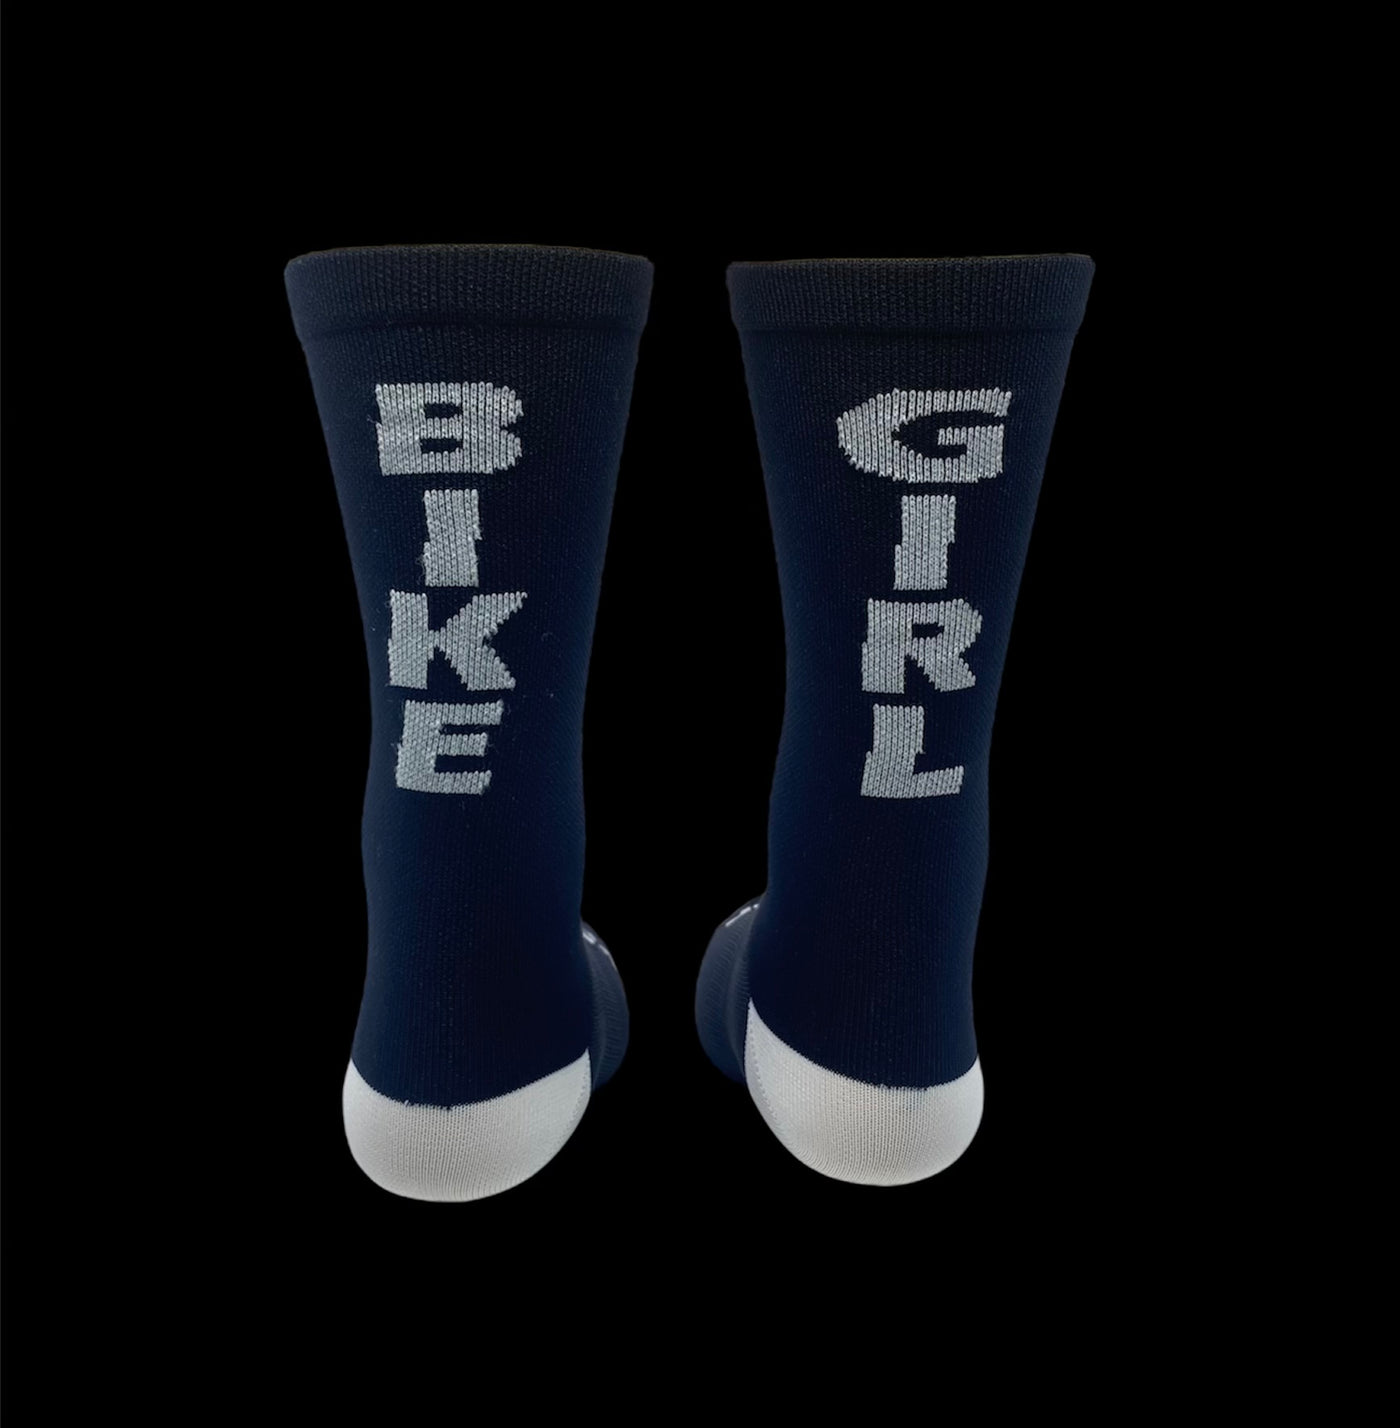 “BIKE GIRL!”Black and white 6" Women's cycling sock with compression.